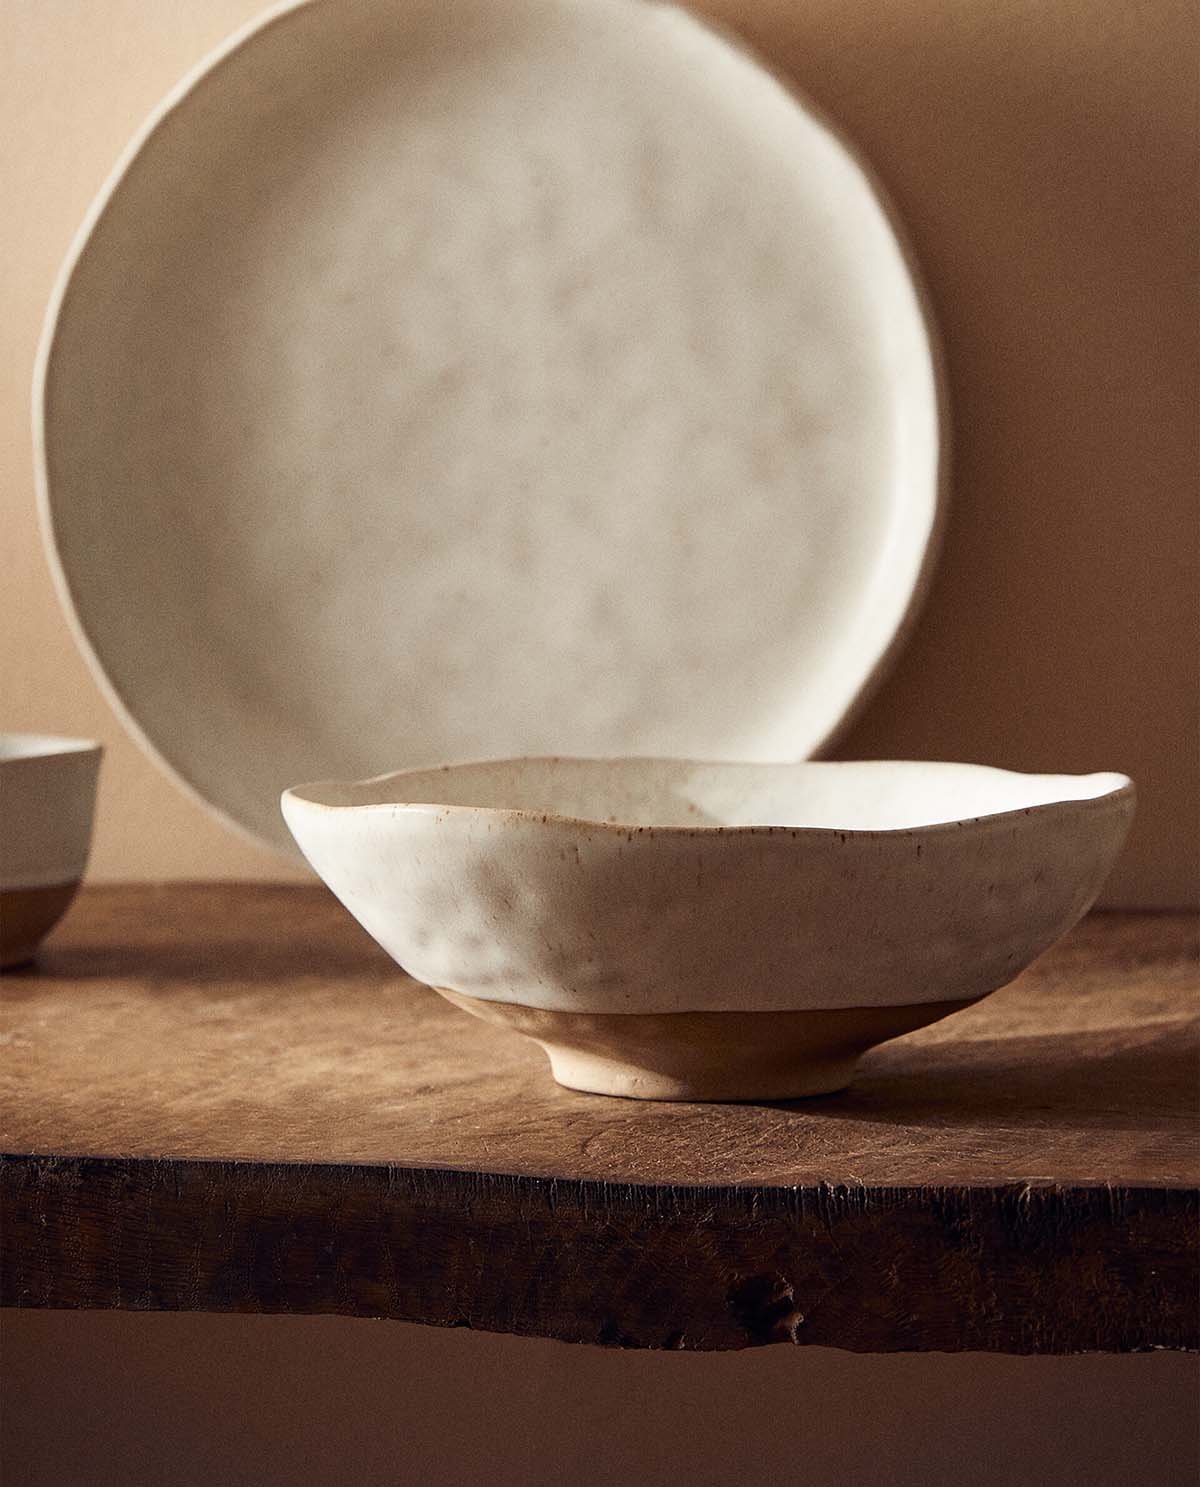 A textured ceramic stoneware bowl on a wooden countertop, with a matching plate behind it